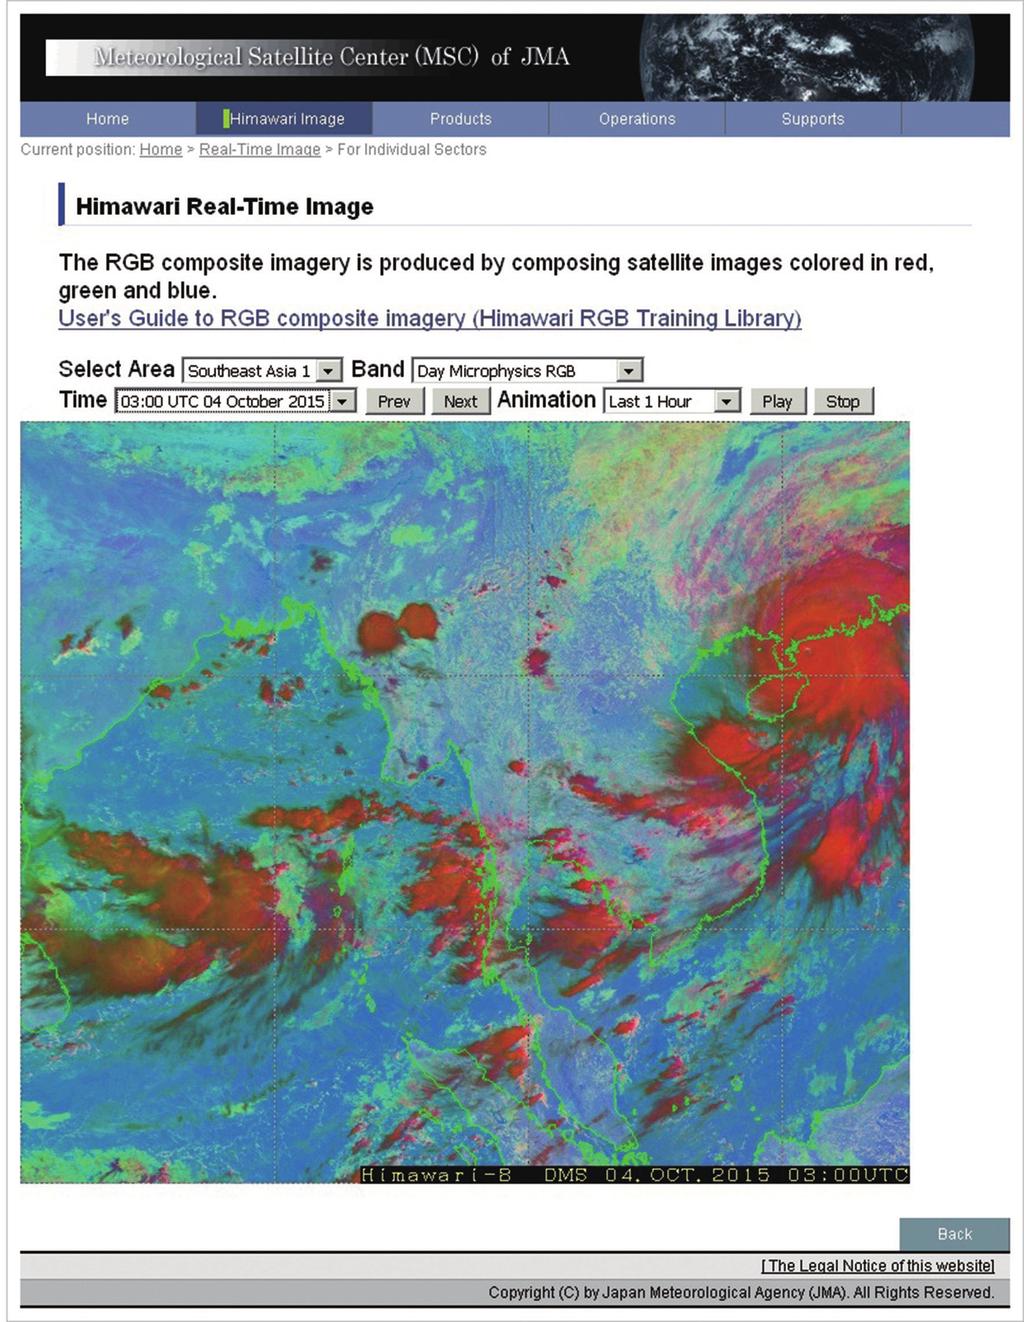 174 Journal of the Meteorological Society of Japan Vol. 94, No. 2 Fig. 15. MSC website for provision of RGB composite images from Himawari-8 to users of SWFDP and SWFDDP of WMO/CBS.